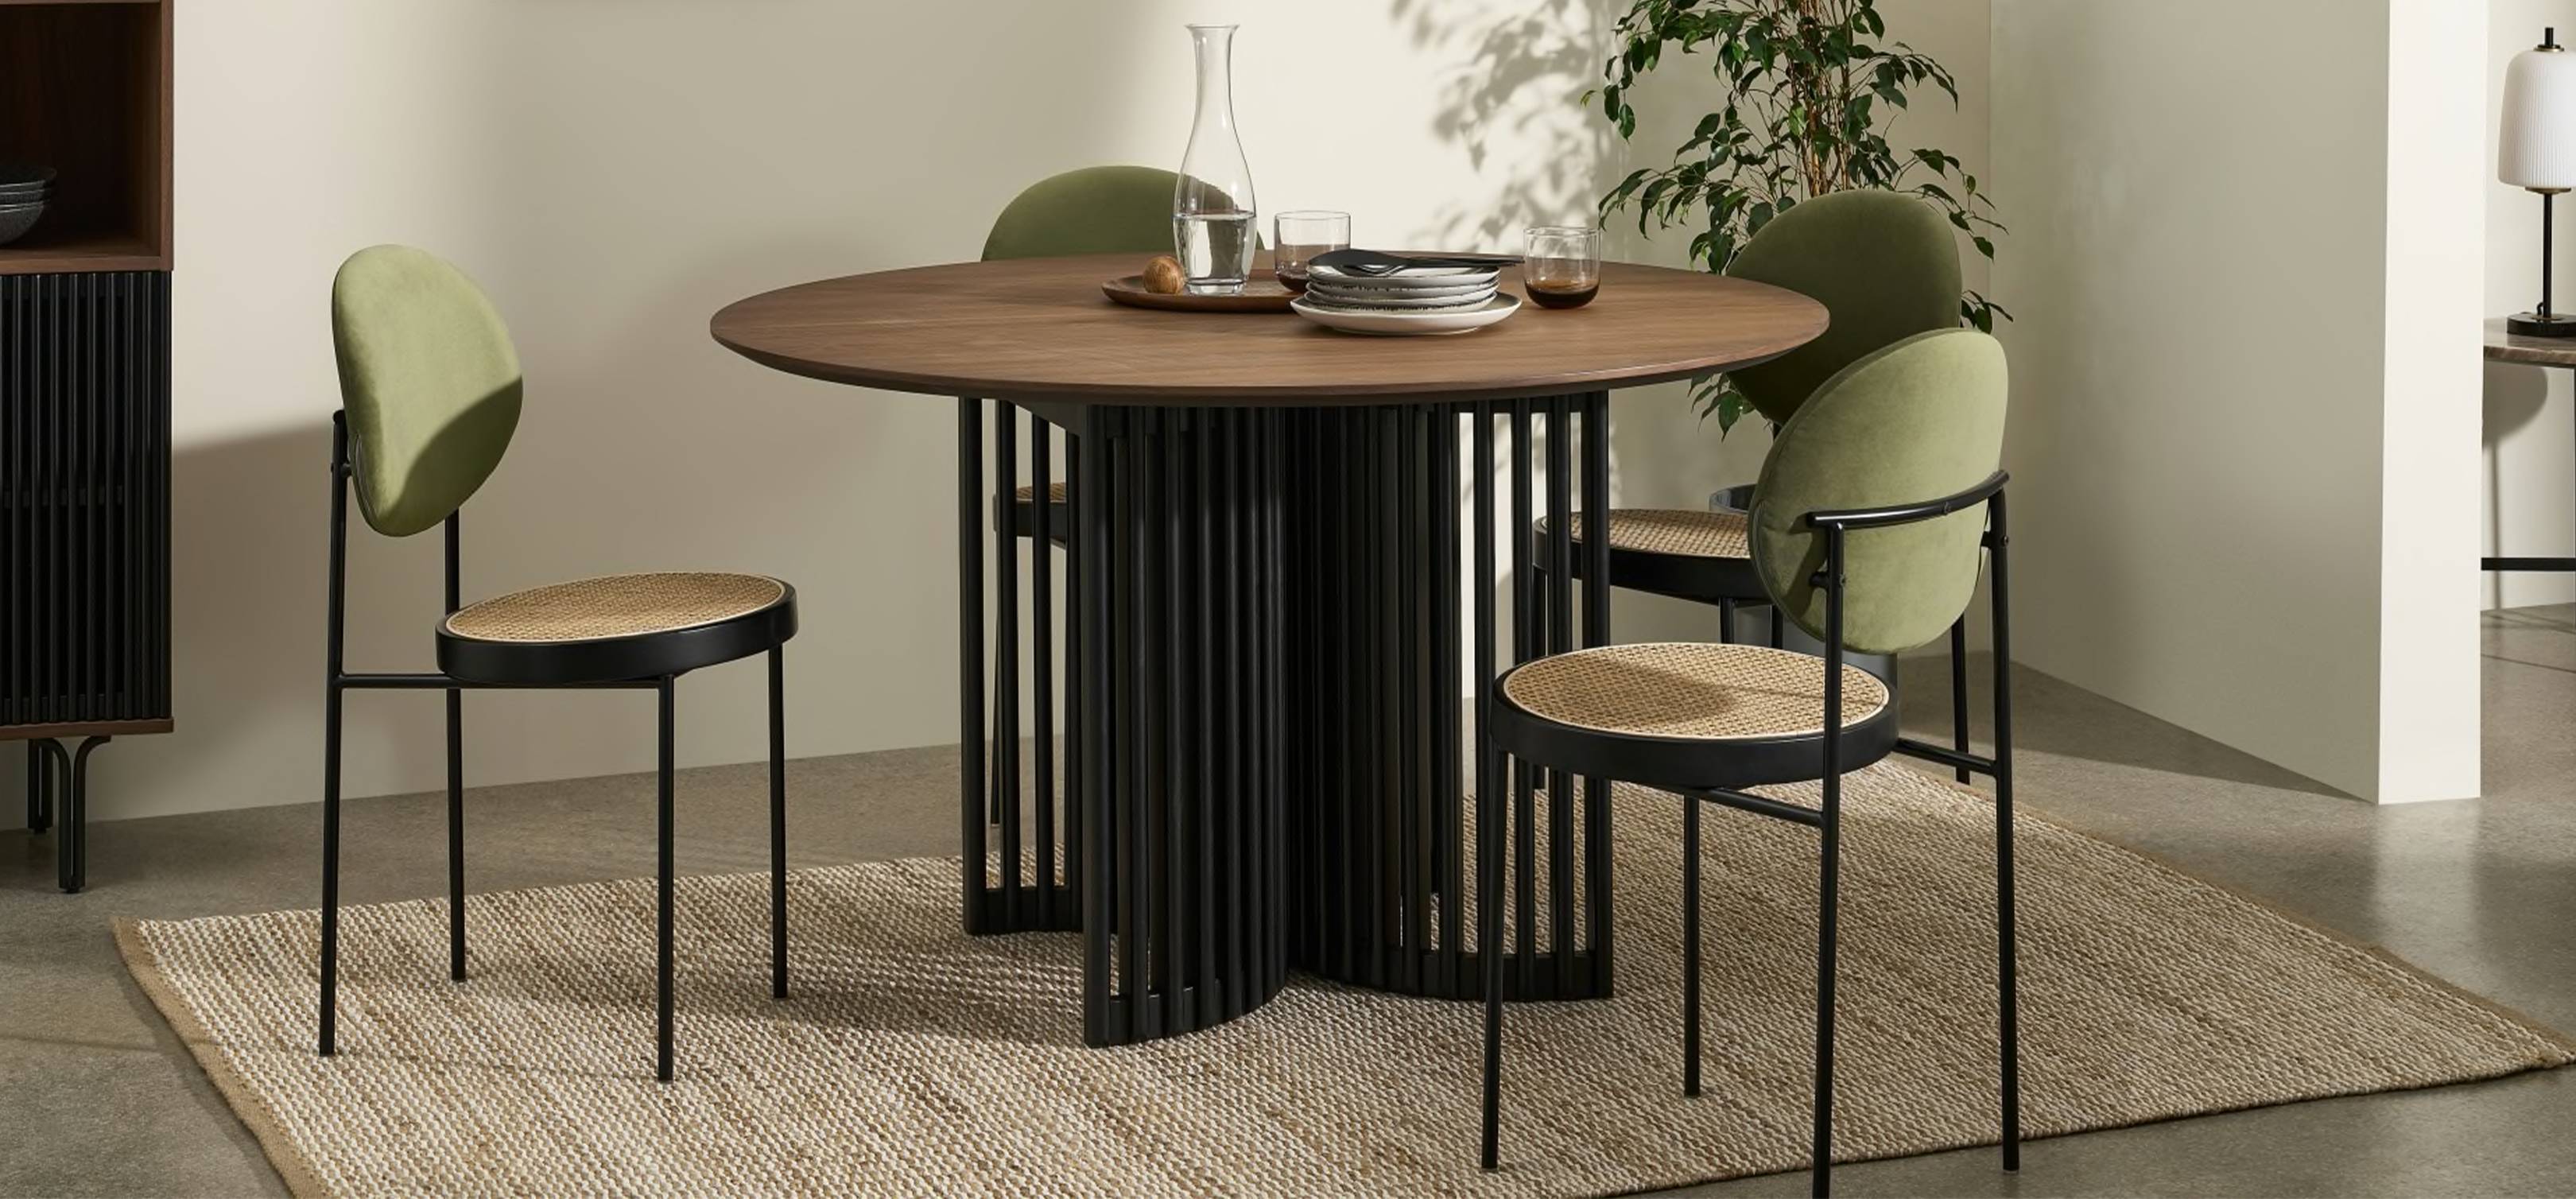 Space Saver Dining Room Sets - Ultimate Space Saving Dining Table Set Expand Furniture Folding Tables Smarter Wall Beds Space Savers / Explore our catalog for these and other modern transforming dining sets.